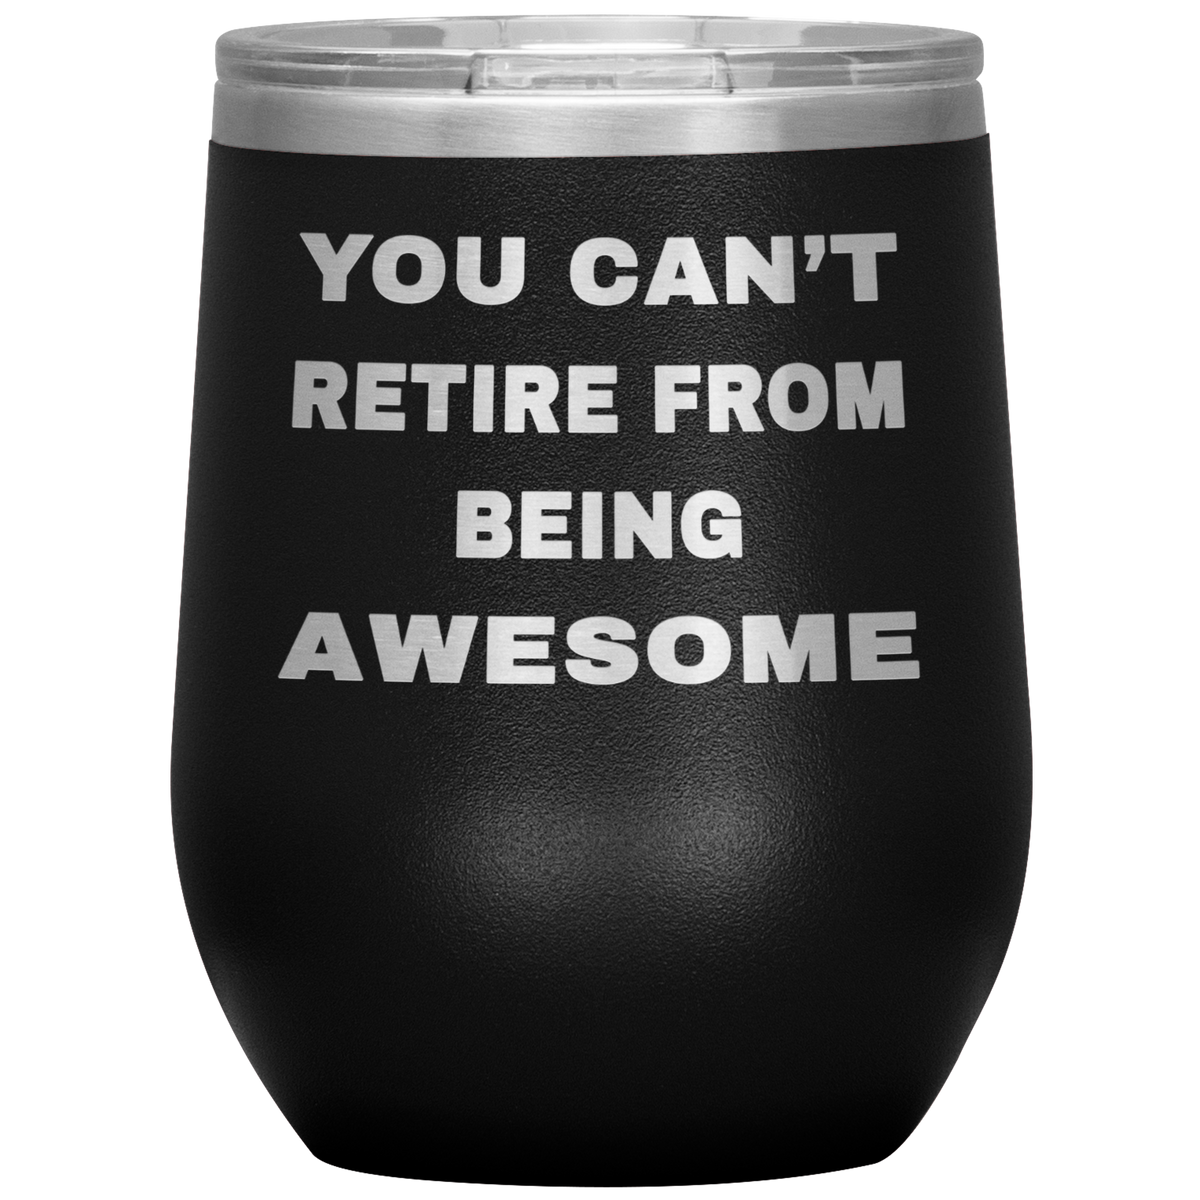 Retirement Gift For Men Women - You Can't Retire From Being Awesome Stainless Steel Wine Tumbler 12oz (black)